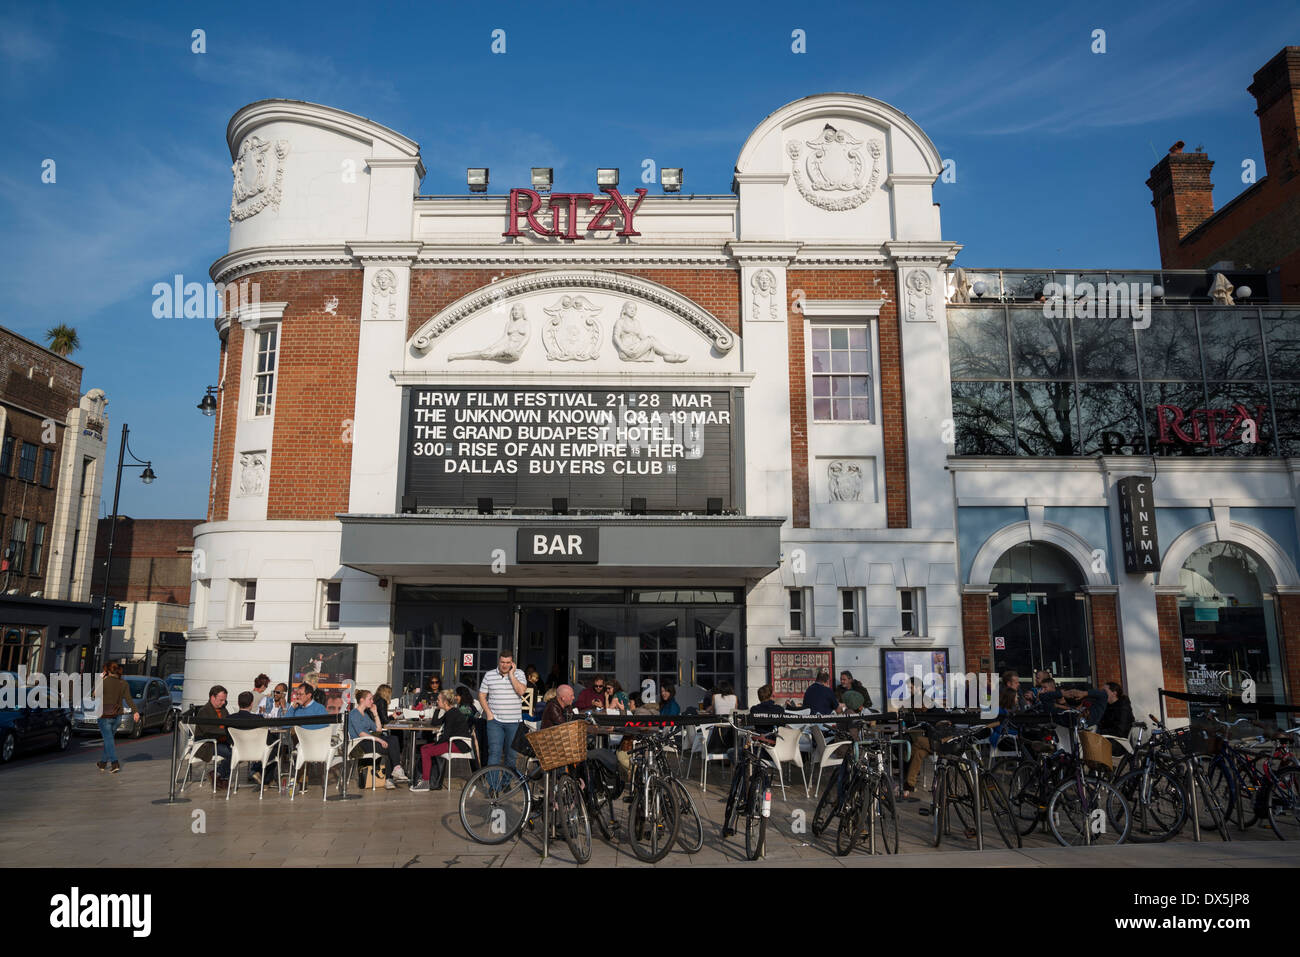 People in outdoor bar at Ritzy Cinema Brixton, London, UK Stock Photo